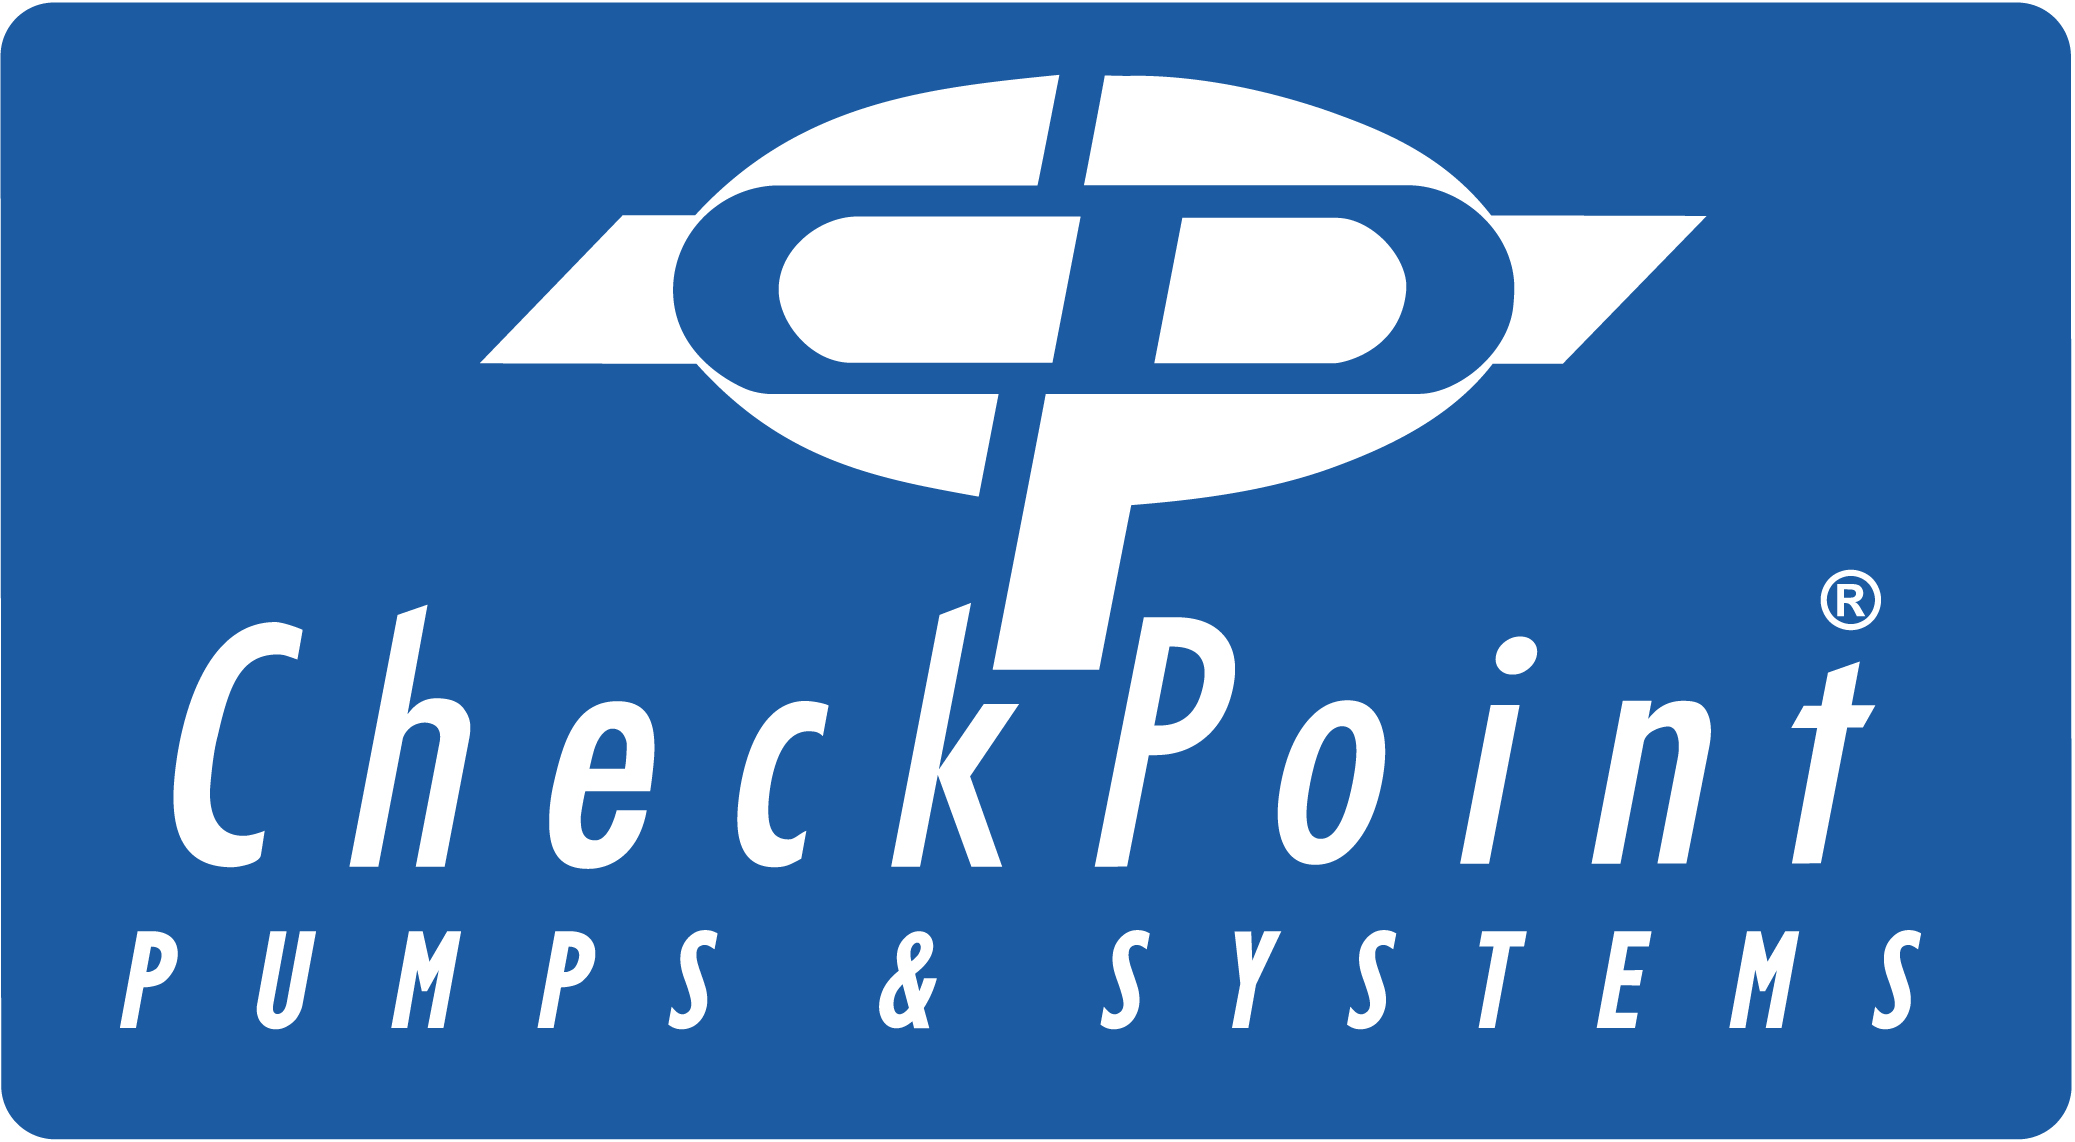 CheckPoint Pumps & Systems